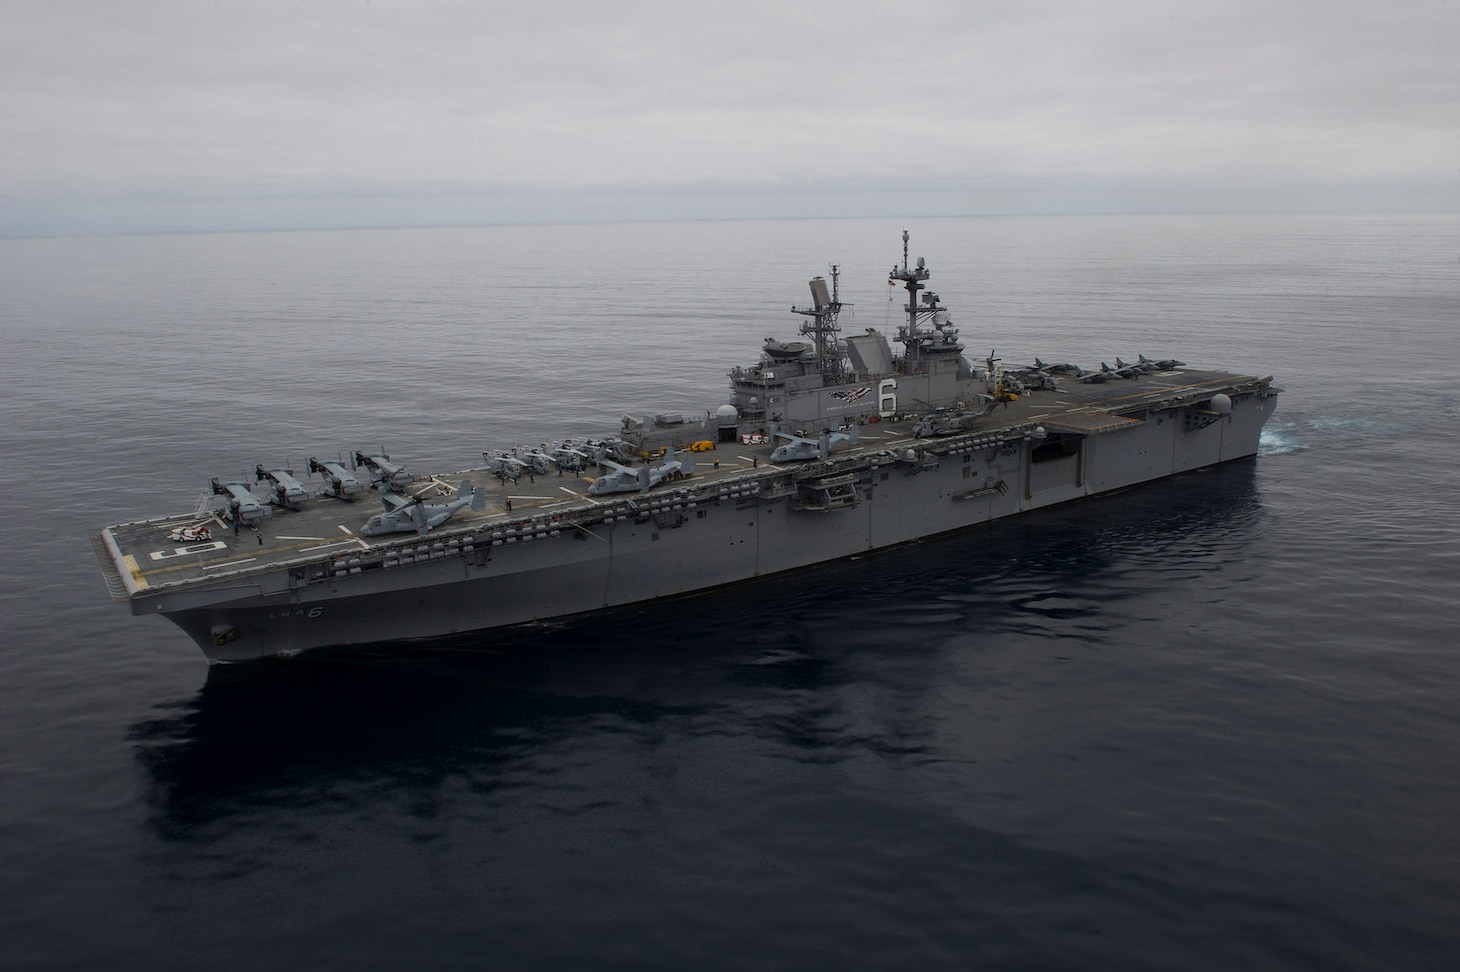 Amphibious assault ship USS America (LHA 6) transits off the coast of Southern California while conducting flight operations, April 3, 2017. America is currently underway with more than 1,000 Sailors and 1,600 embarked Marines conducting Amphibious Squadron/Marine Expeditionary Unit Integration operations in preparation for the ship’s maiden deployment later this year.